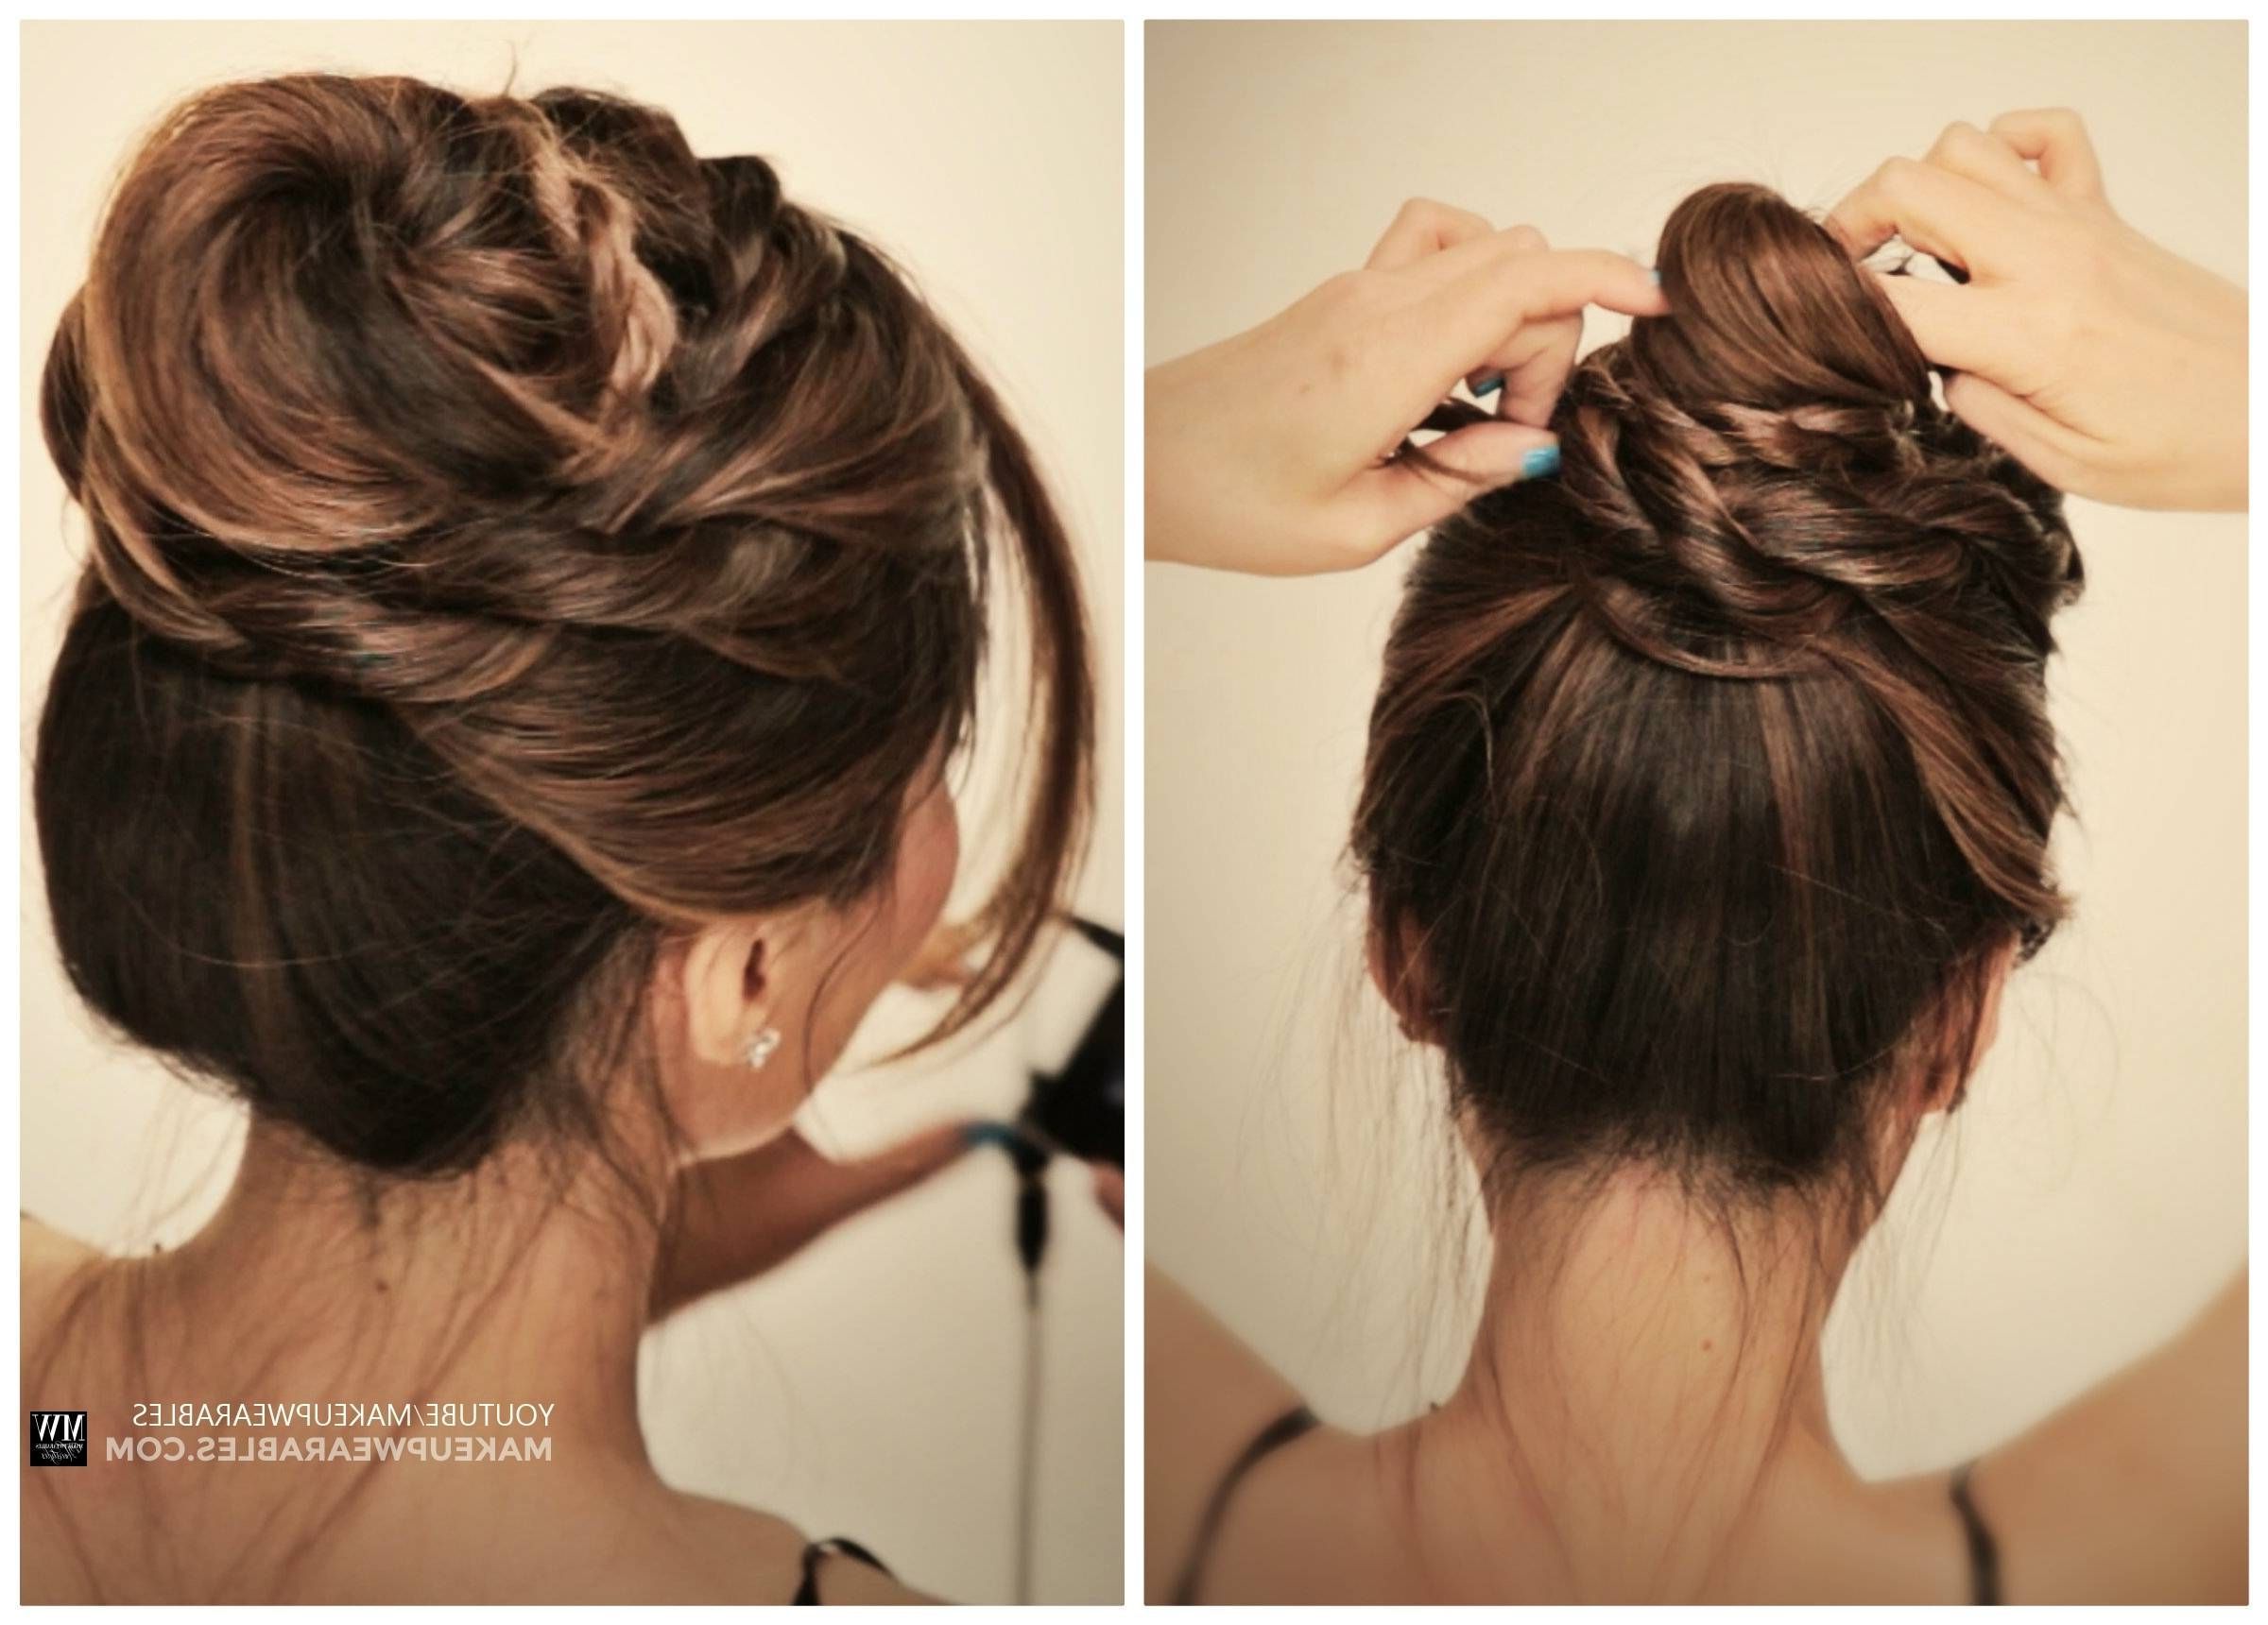 Famous Simple Pony Updo Hairstyles With A Twist With Regard To Cute Messy Bun Braids Ballerina Twisted Updo Hairstyle (View 4 of 20)